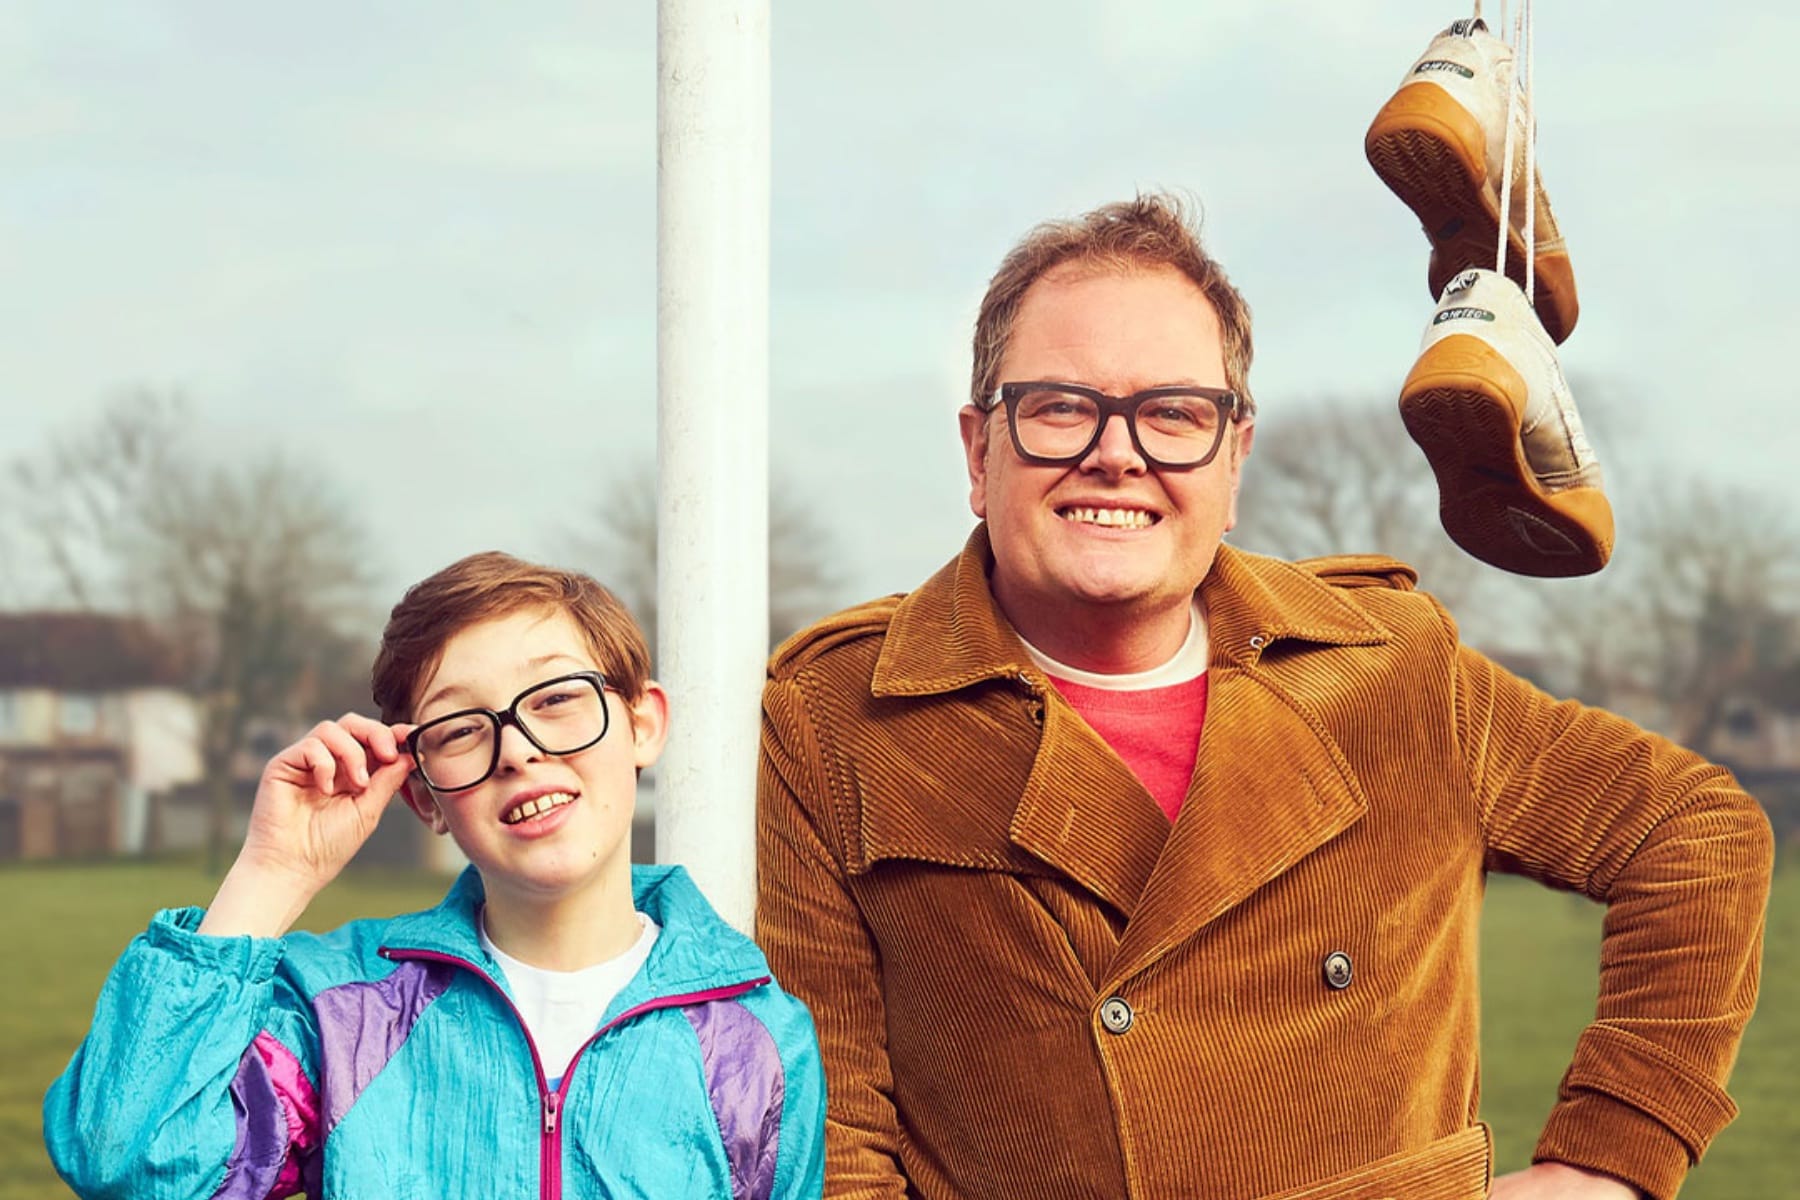 Alan Carr’s autobiographical comedy Changing Ends arrives June 1st